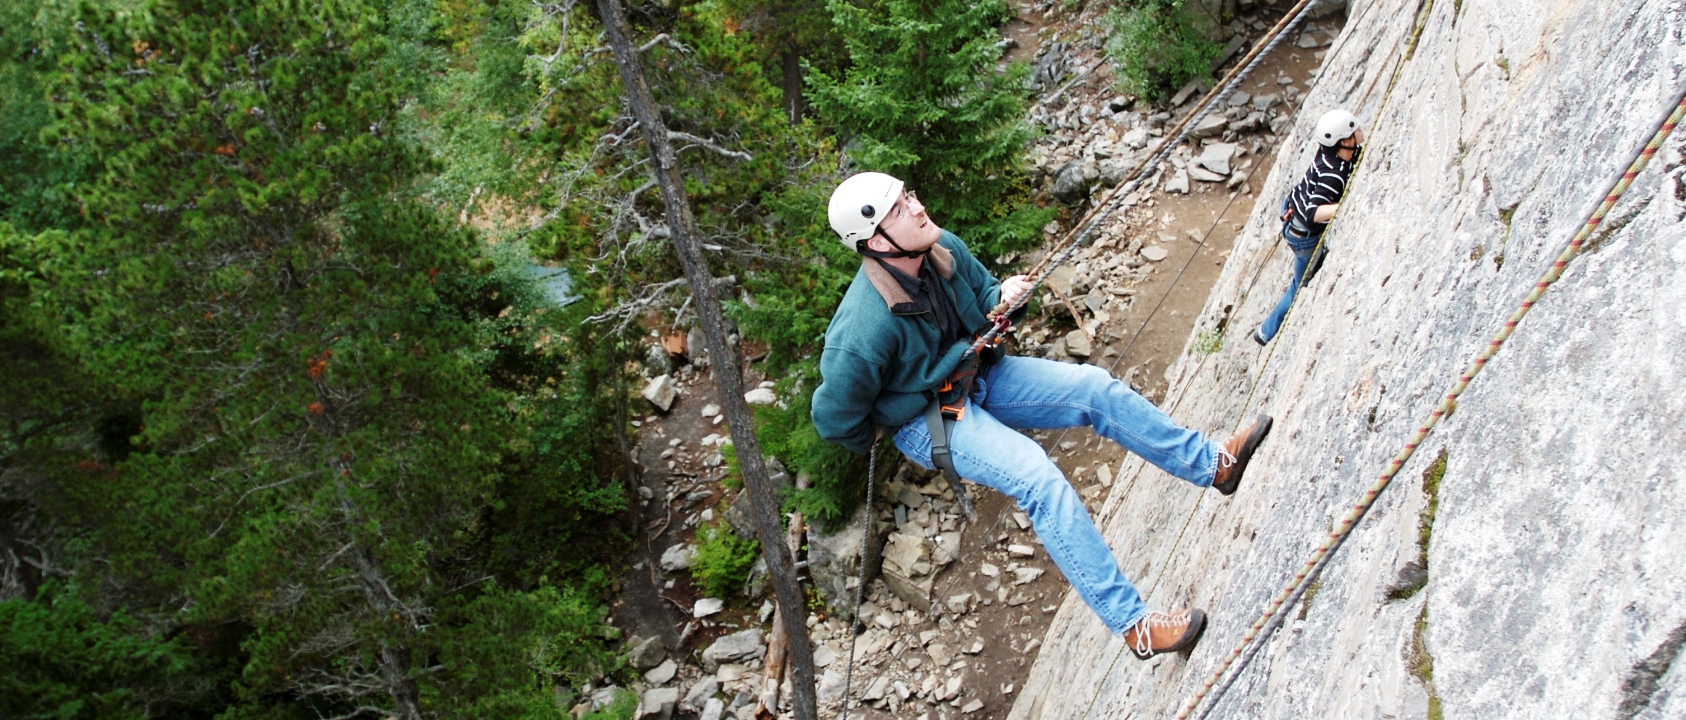 Rock Climbing & Rappelling in Skagway - enjoy a series of climbs and a rappell off of an 80' cliff